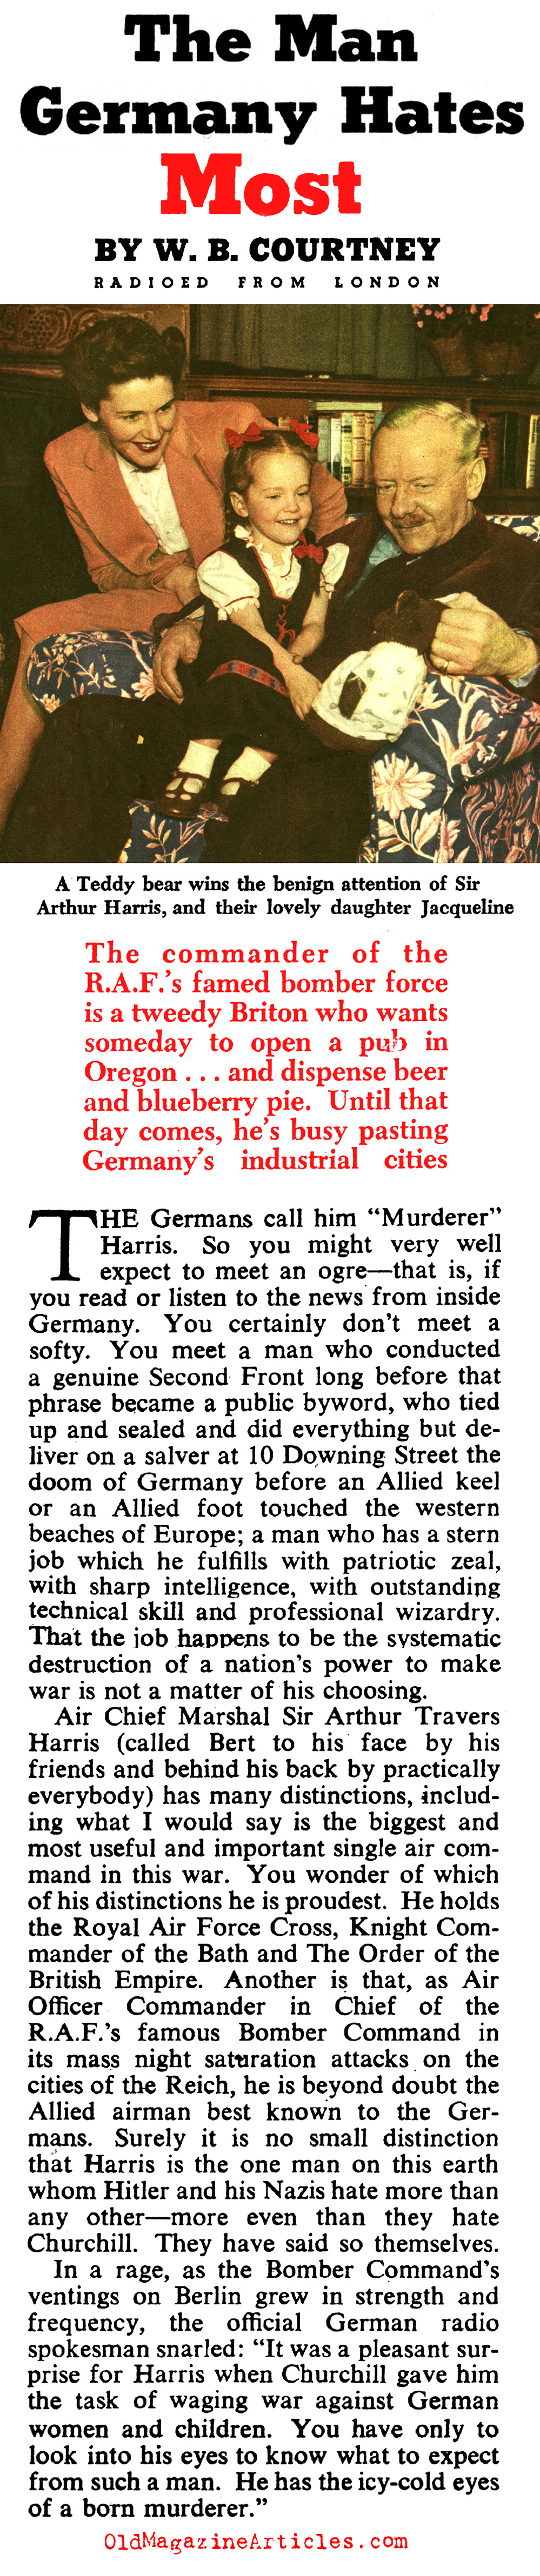 The Man Germany Hates Most (Collier's Magazine, 1944)